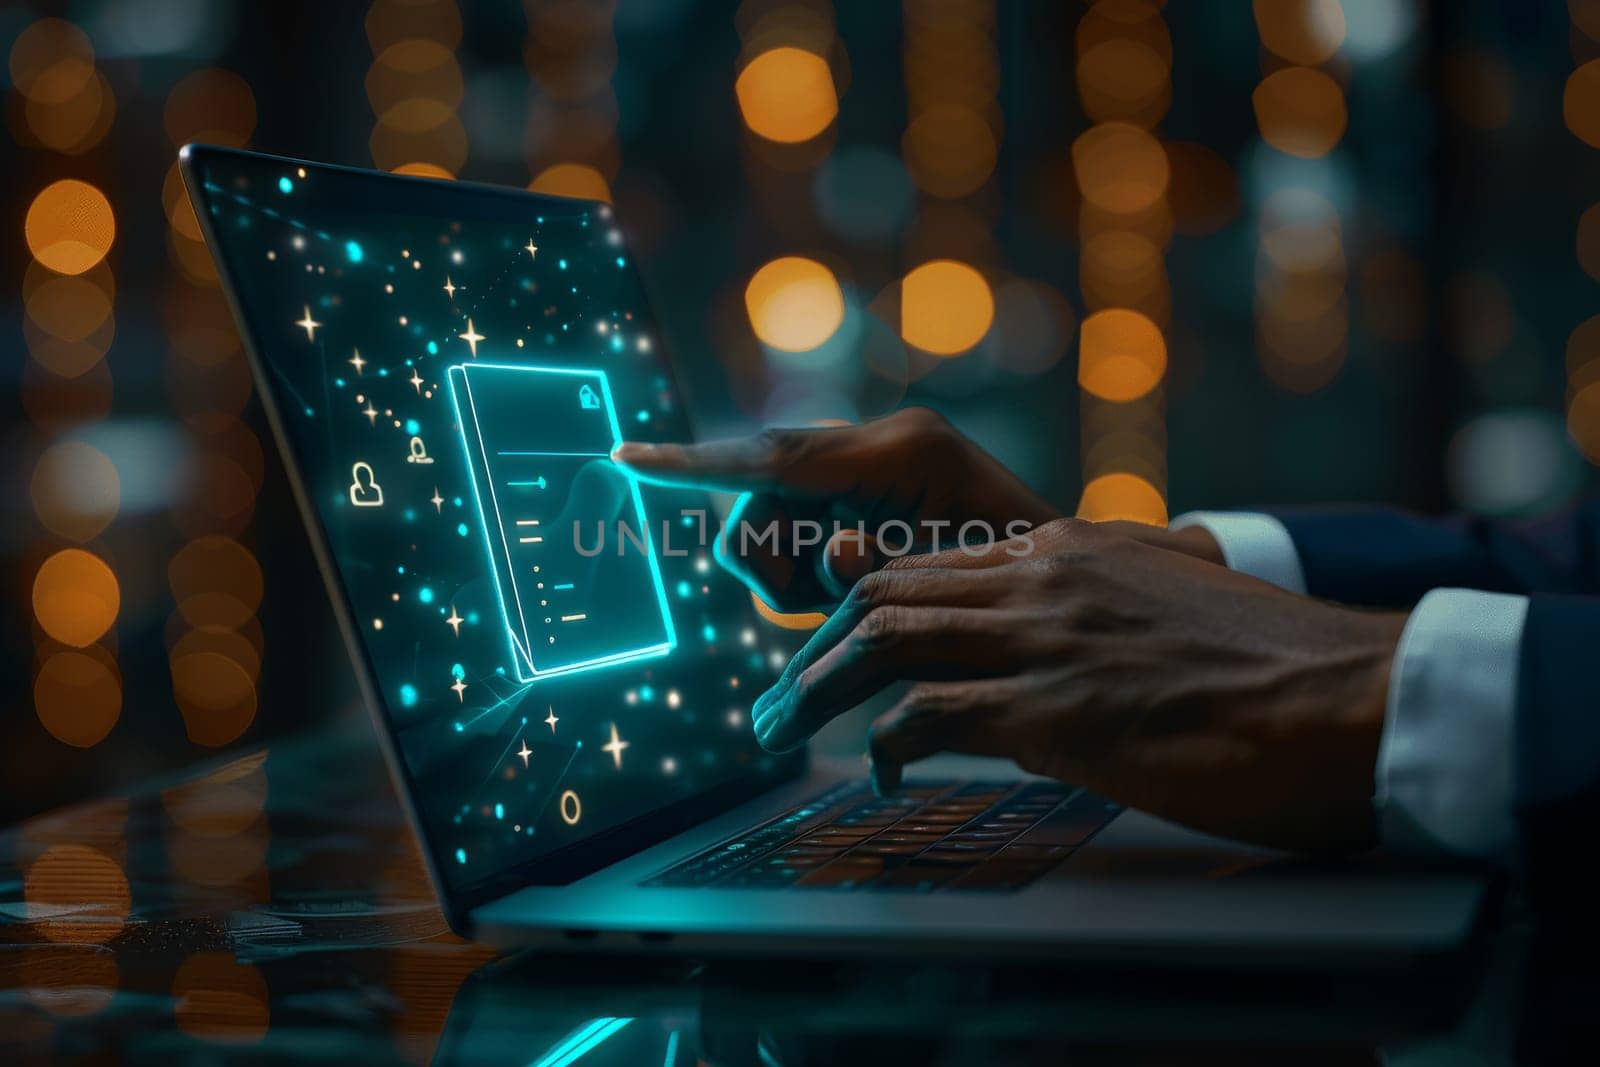 A person is using a laptop with a glowing screen that has a person pointing at a document. Concept of someone working on a project or task, possibly related to a document or presentation